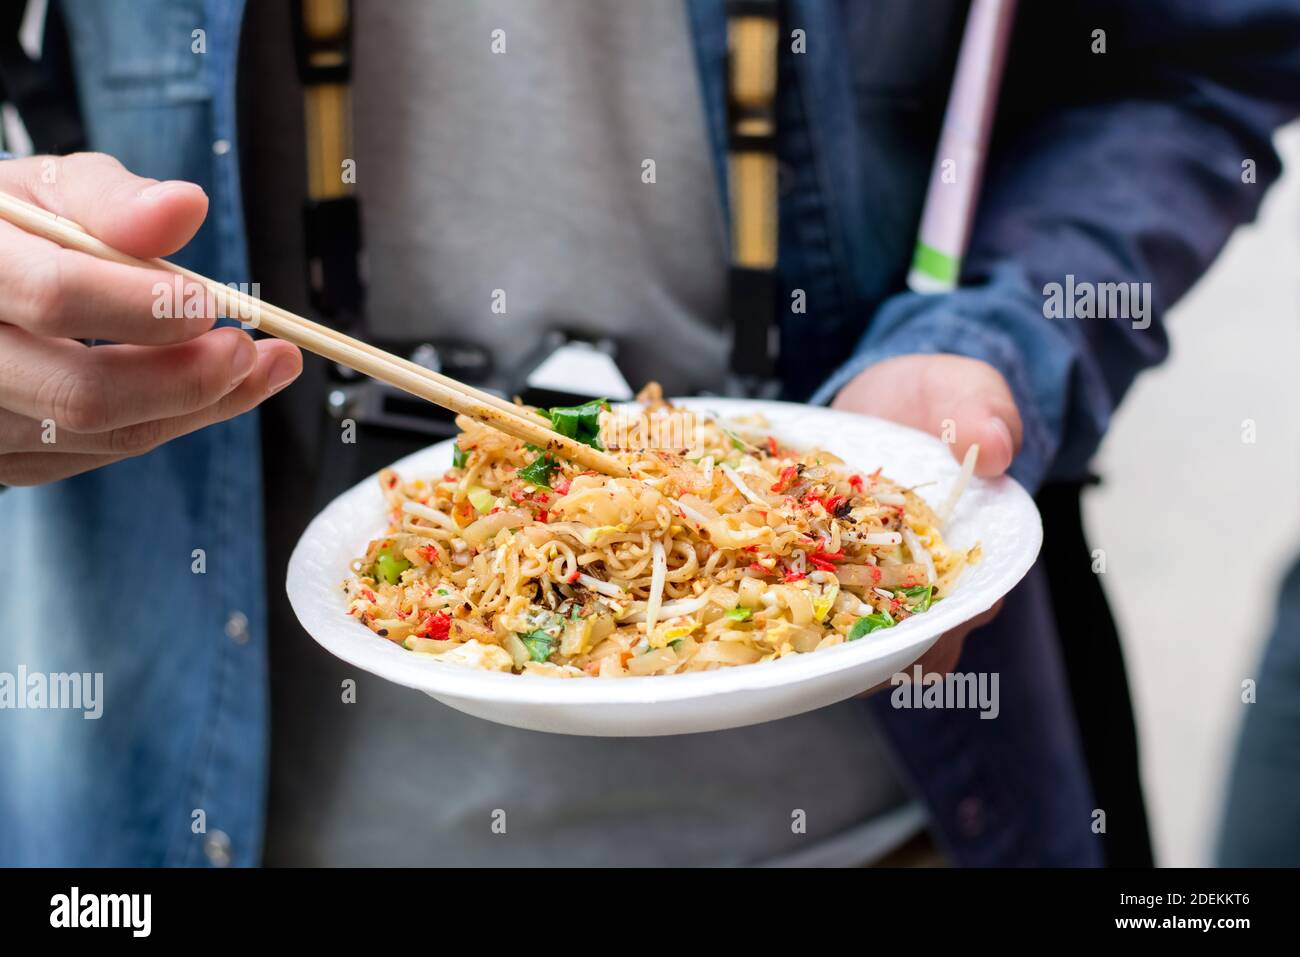 Tourist hands holding Pad Thai, one of famous traditional Thailand street food, with chopsticks about to eat while traveling in Bangkok Stock Photo